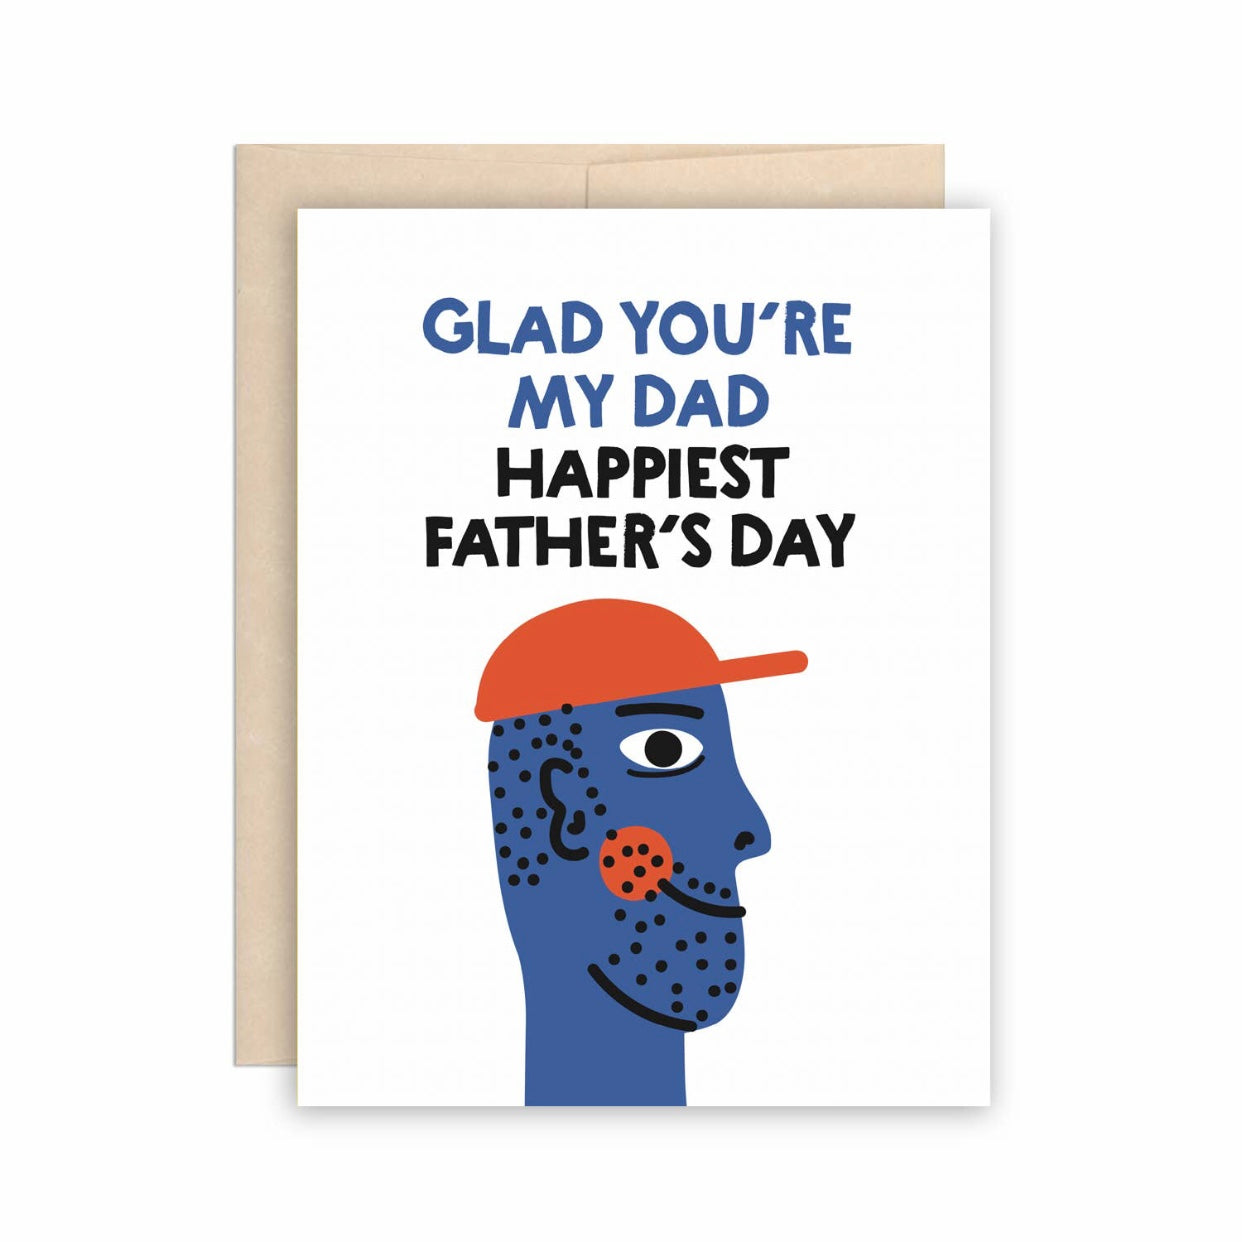 Happiest fathers day cards